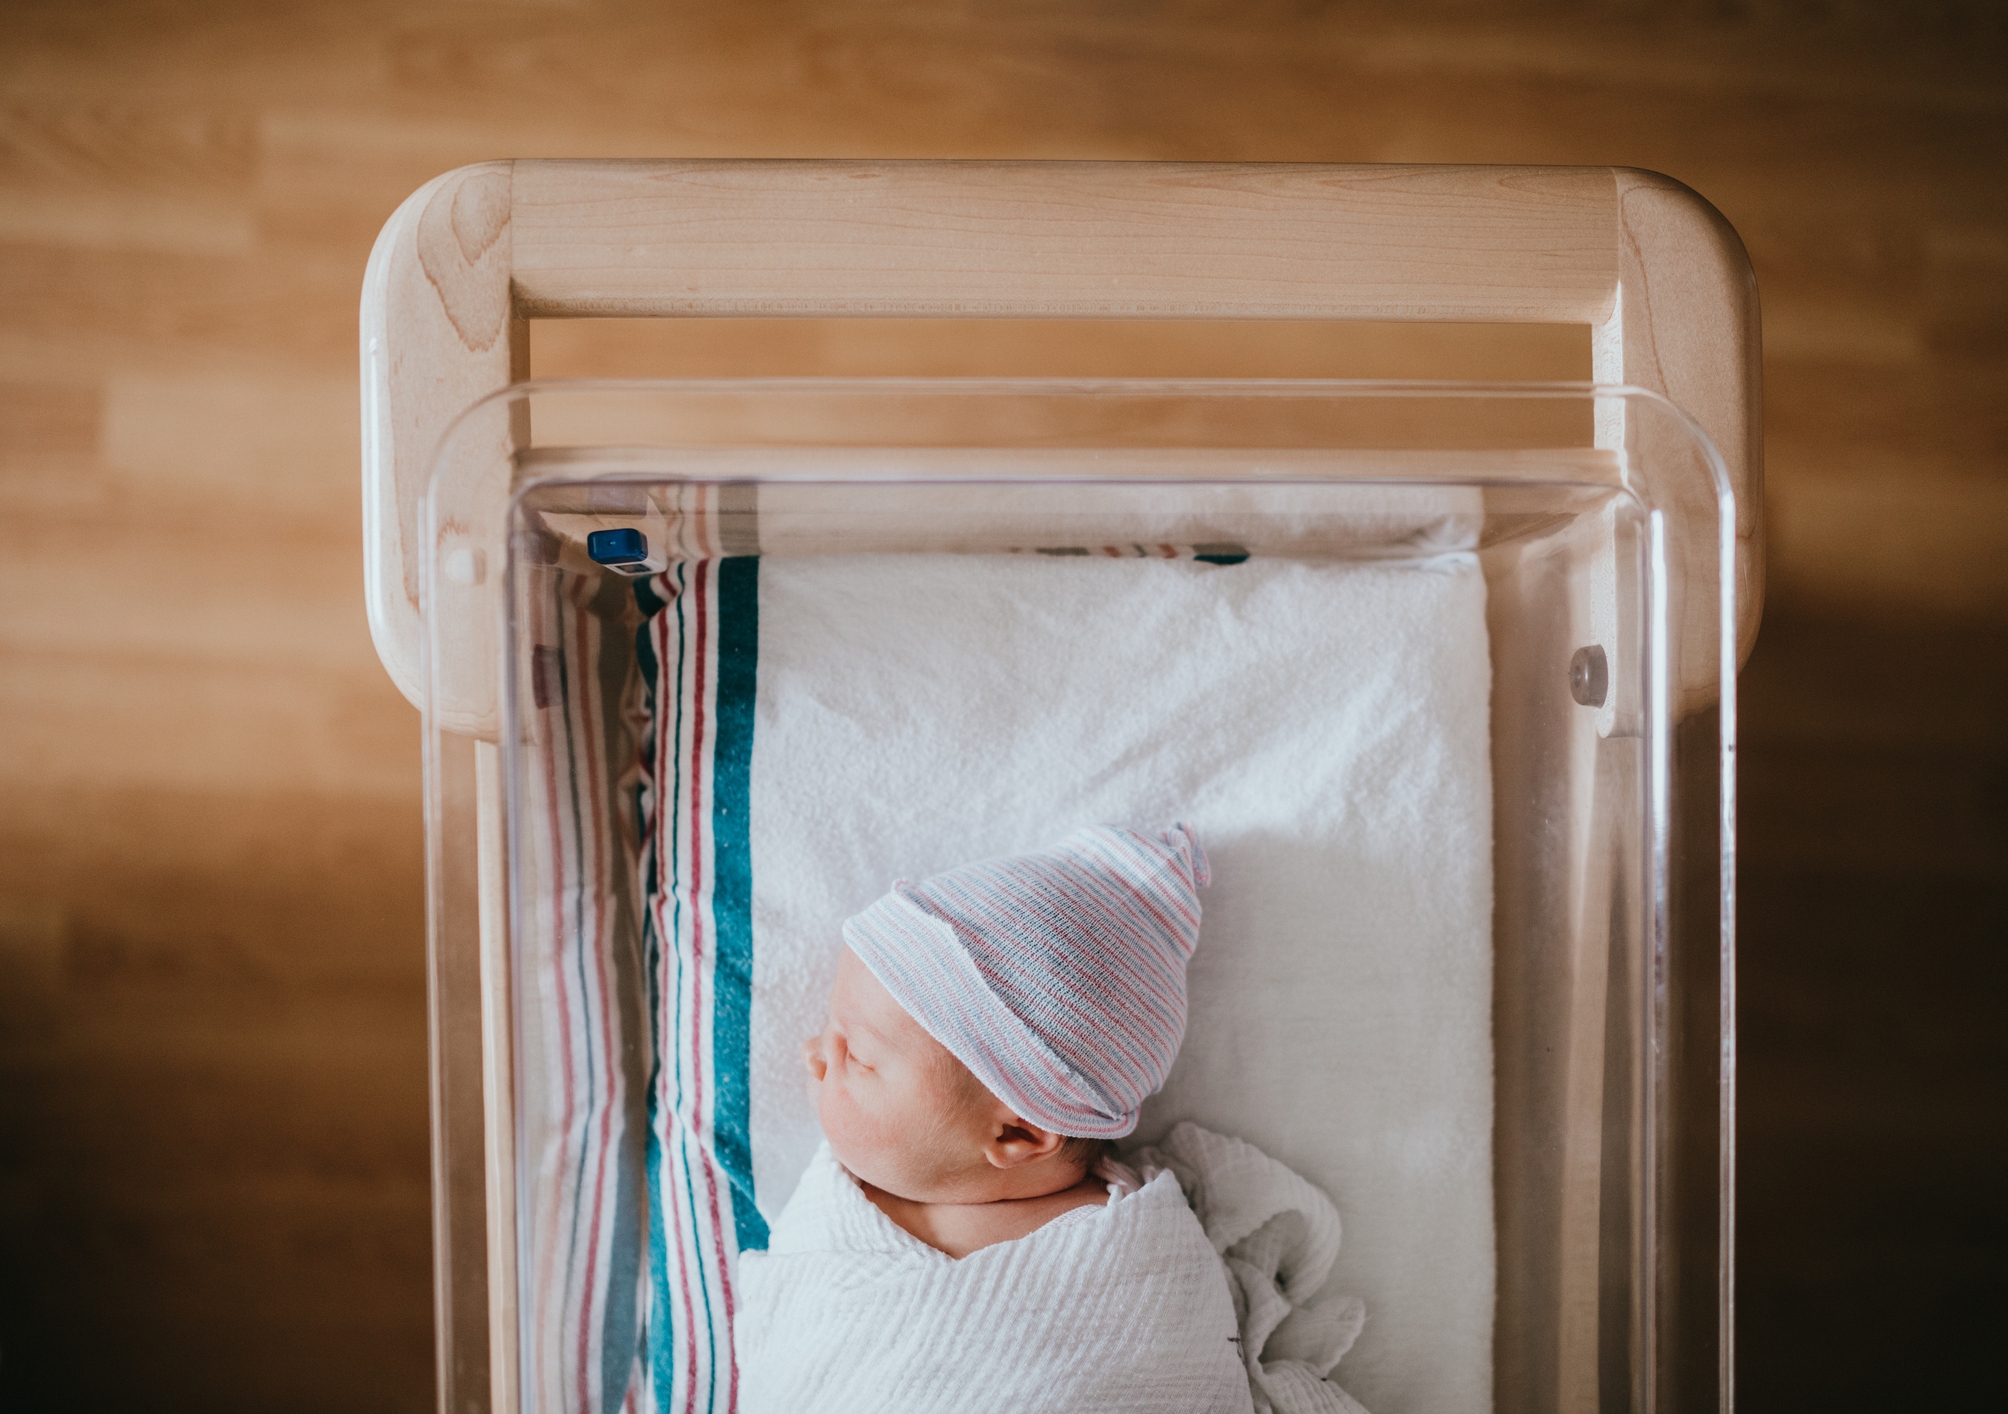 A baby just born at the hospital rests in a hospital bassinet crib, wrapped in a swaddle and wearing a beanie hat.